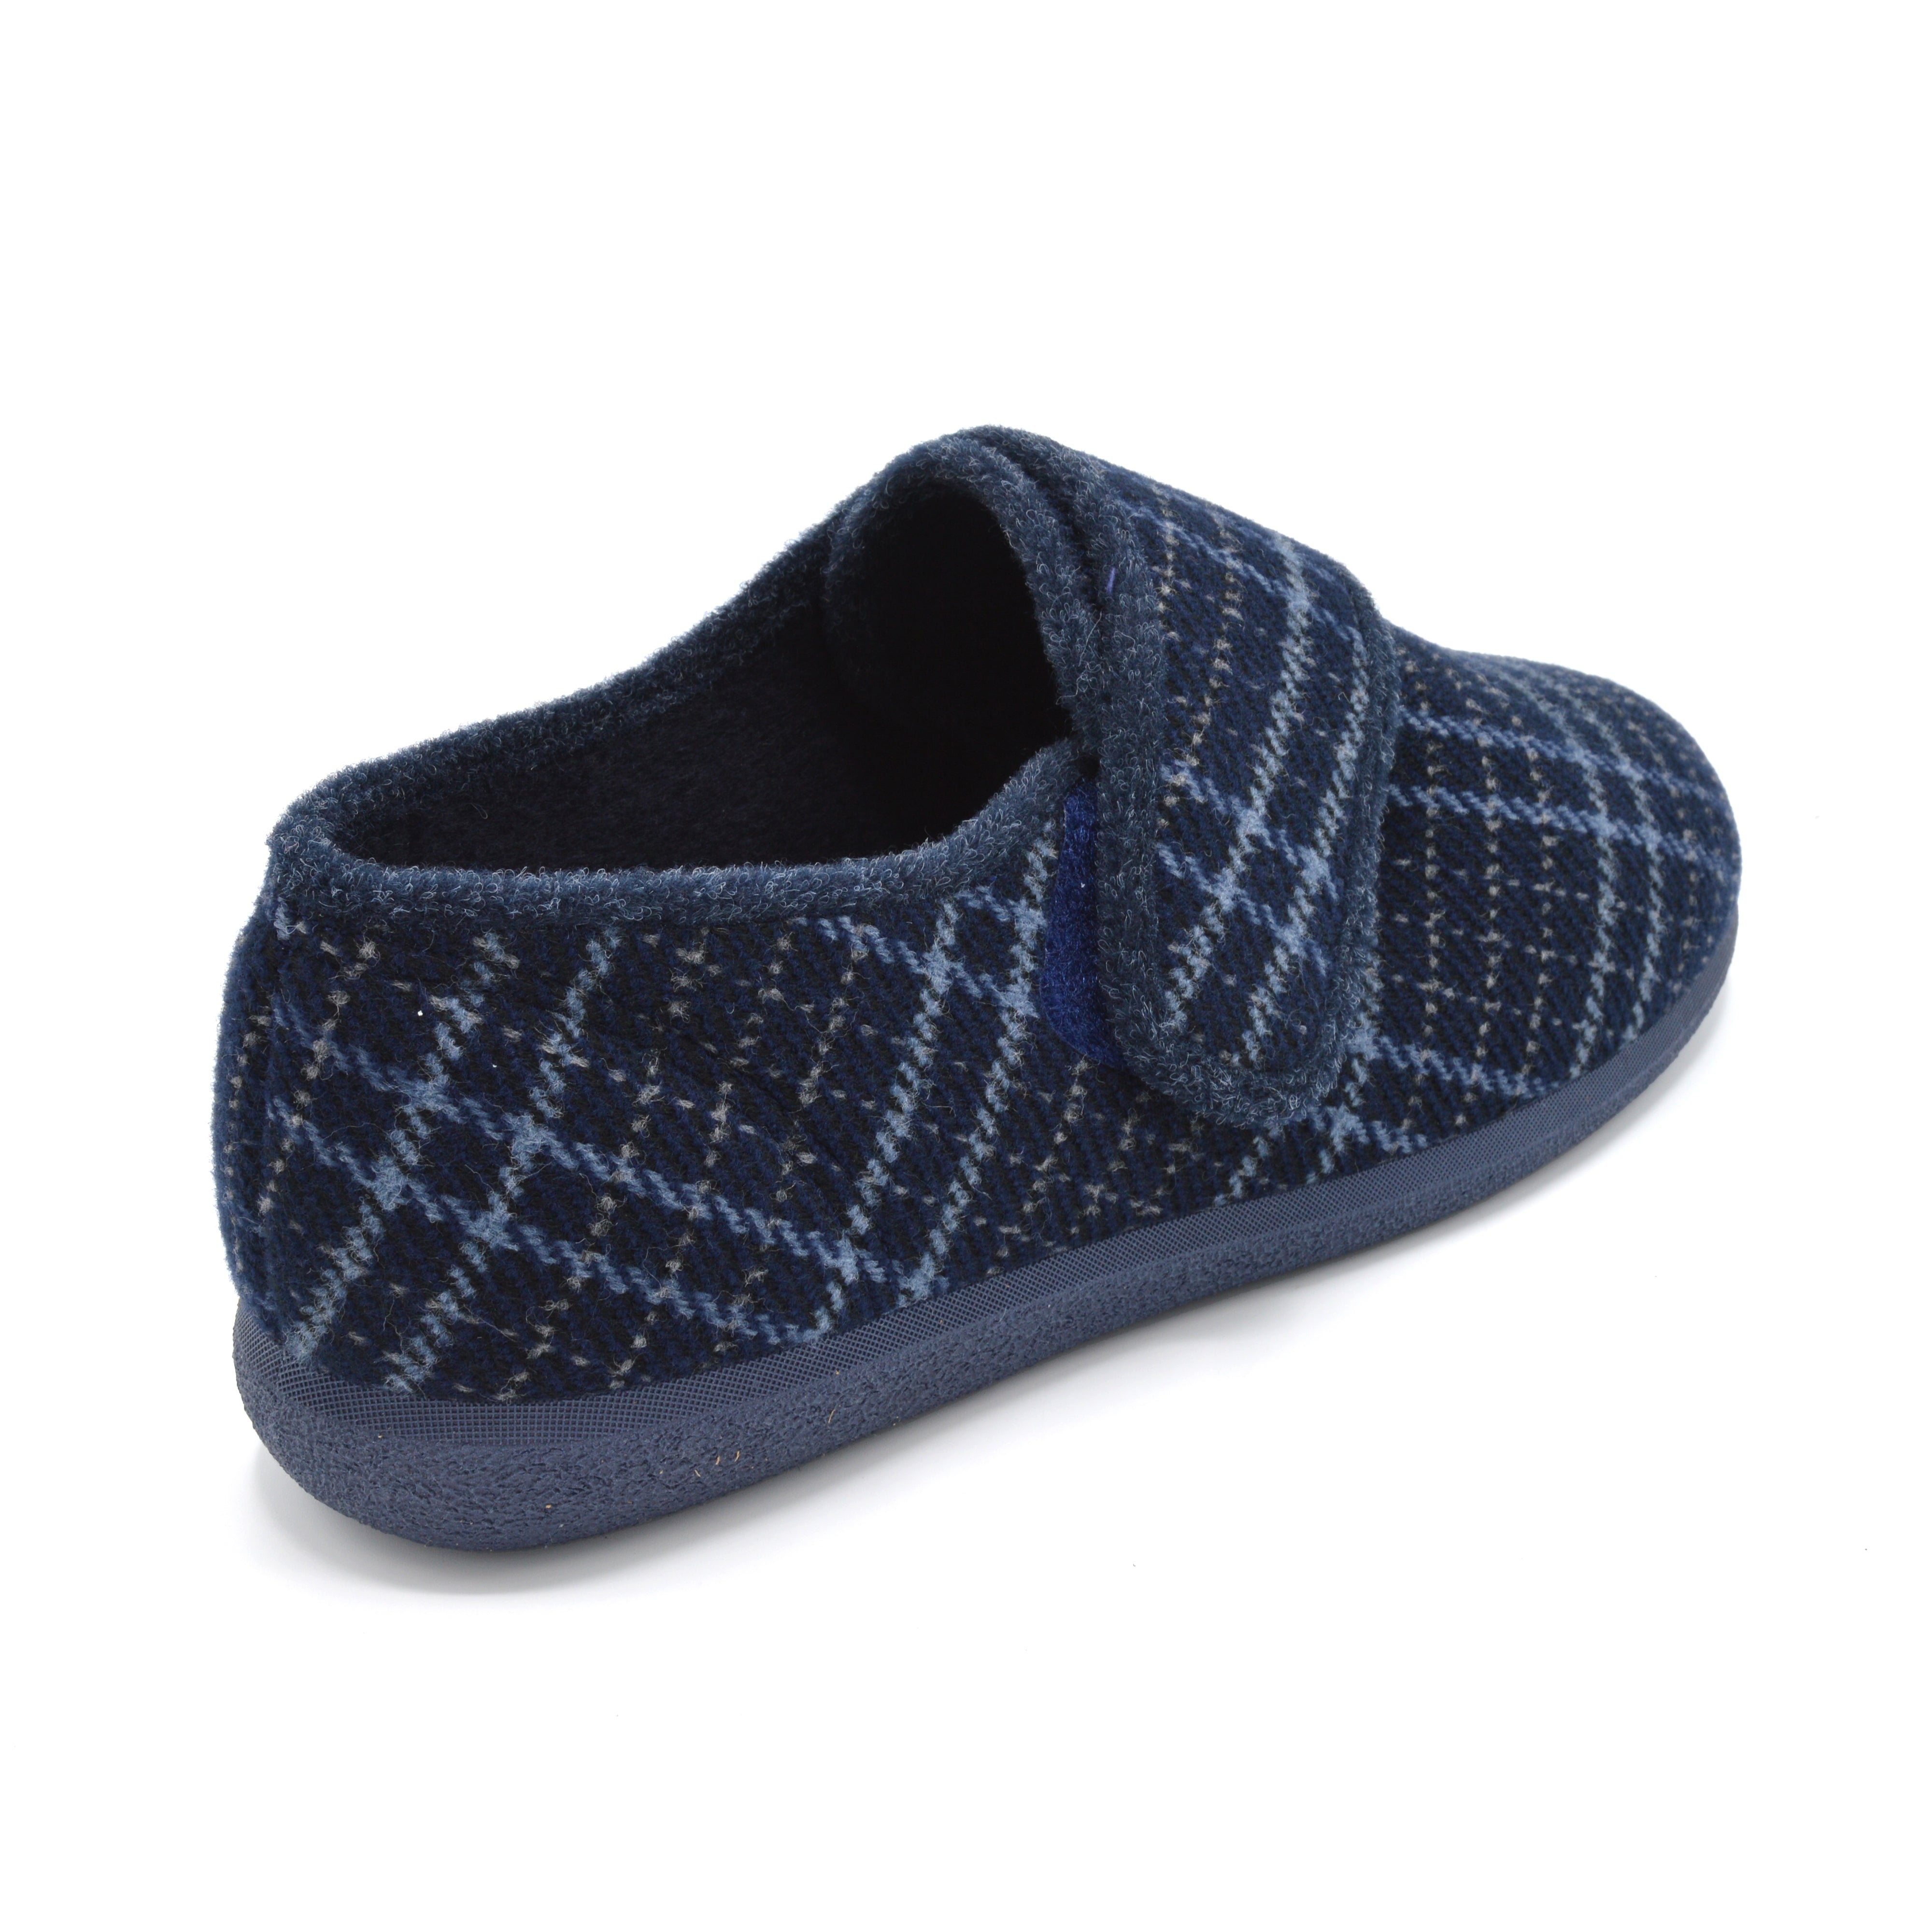 Navy Extra Wide Fitting Slipper For Swollon Feet